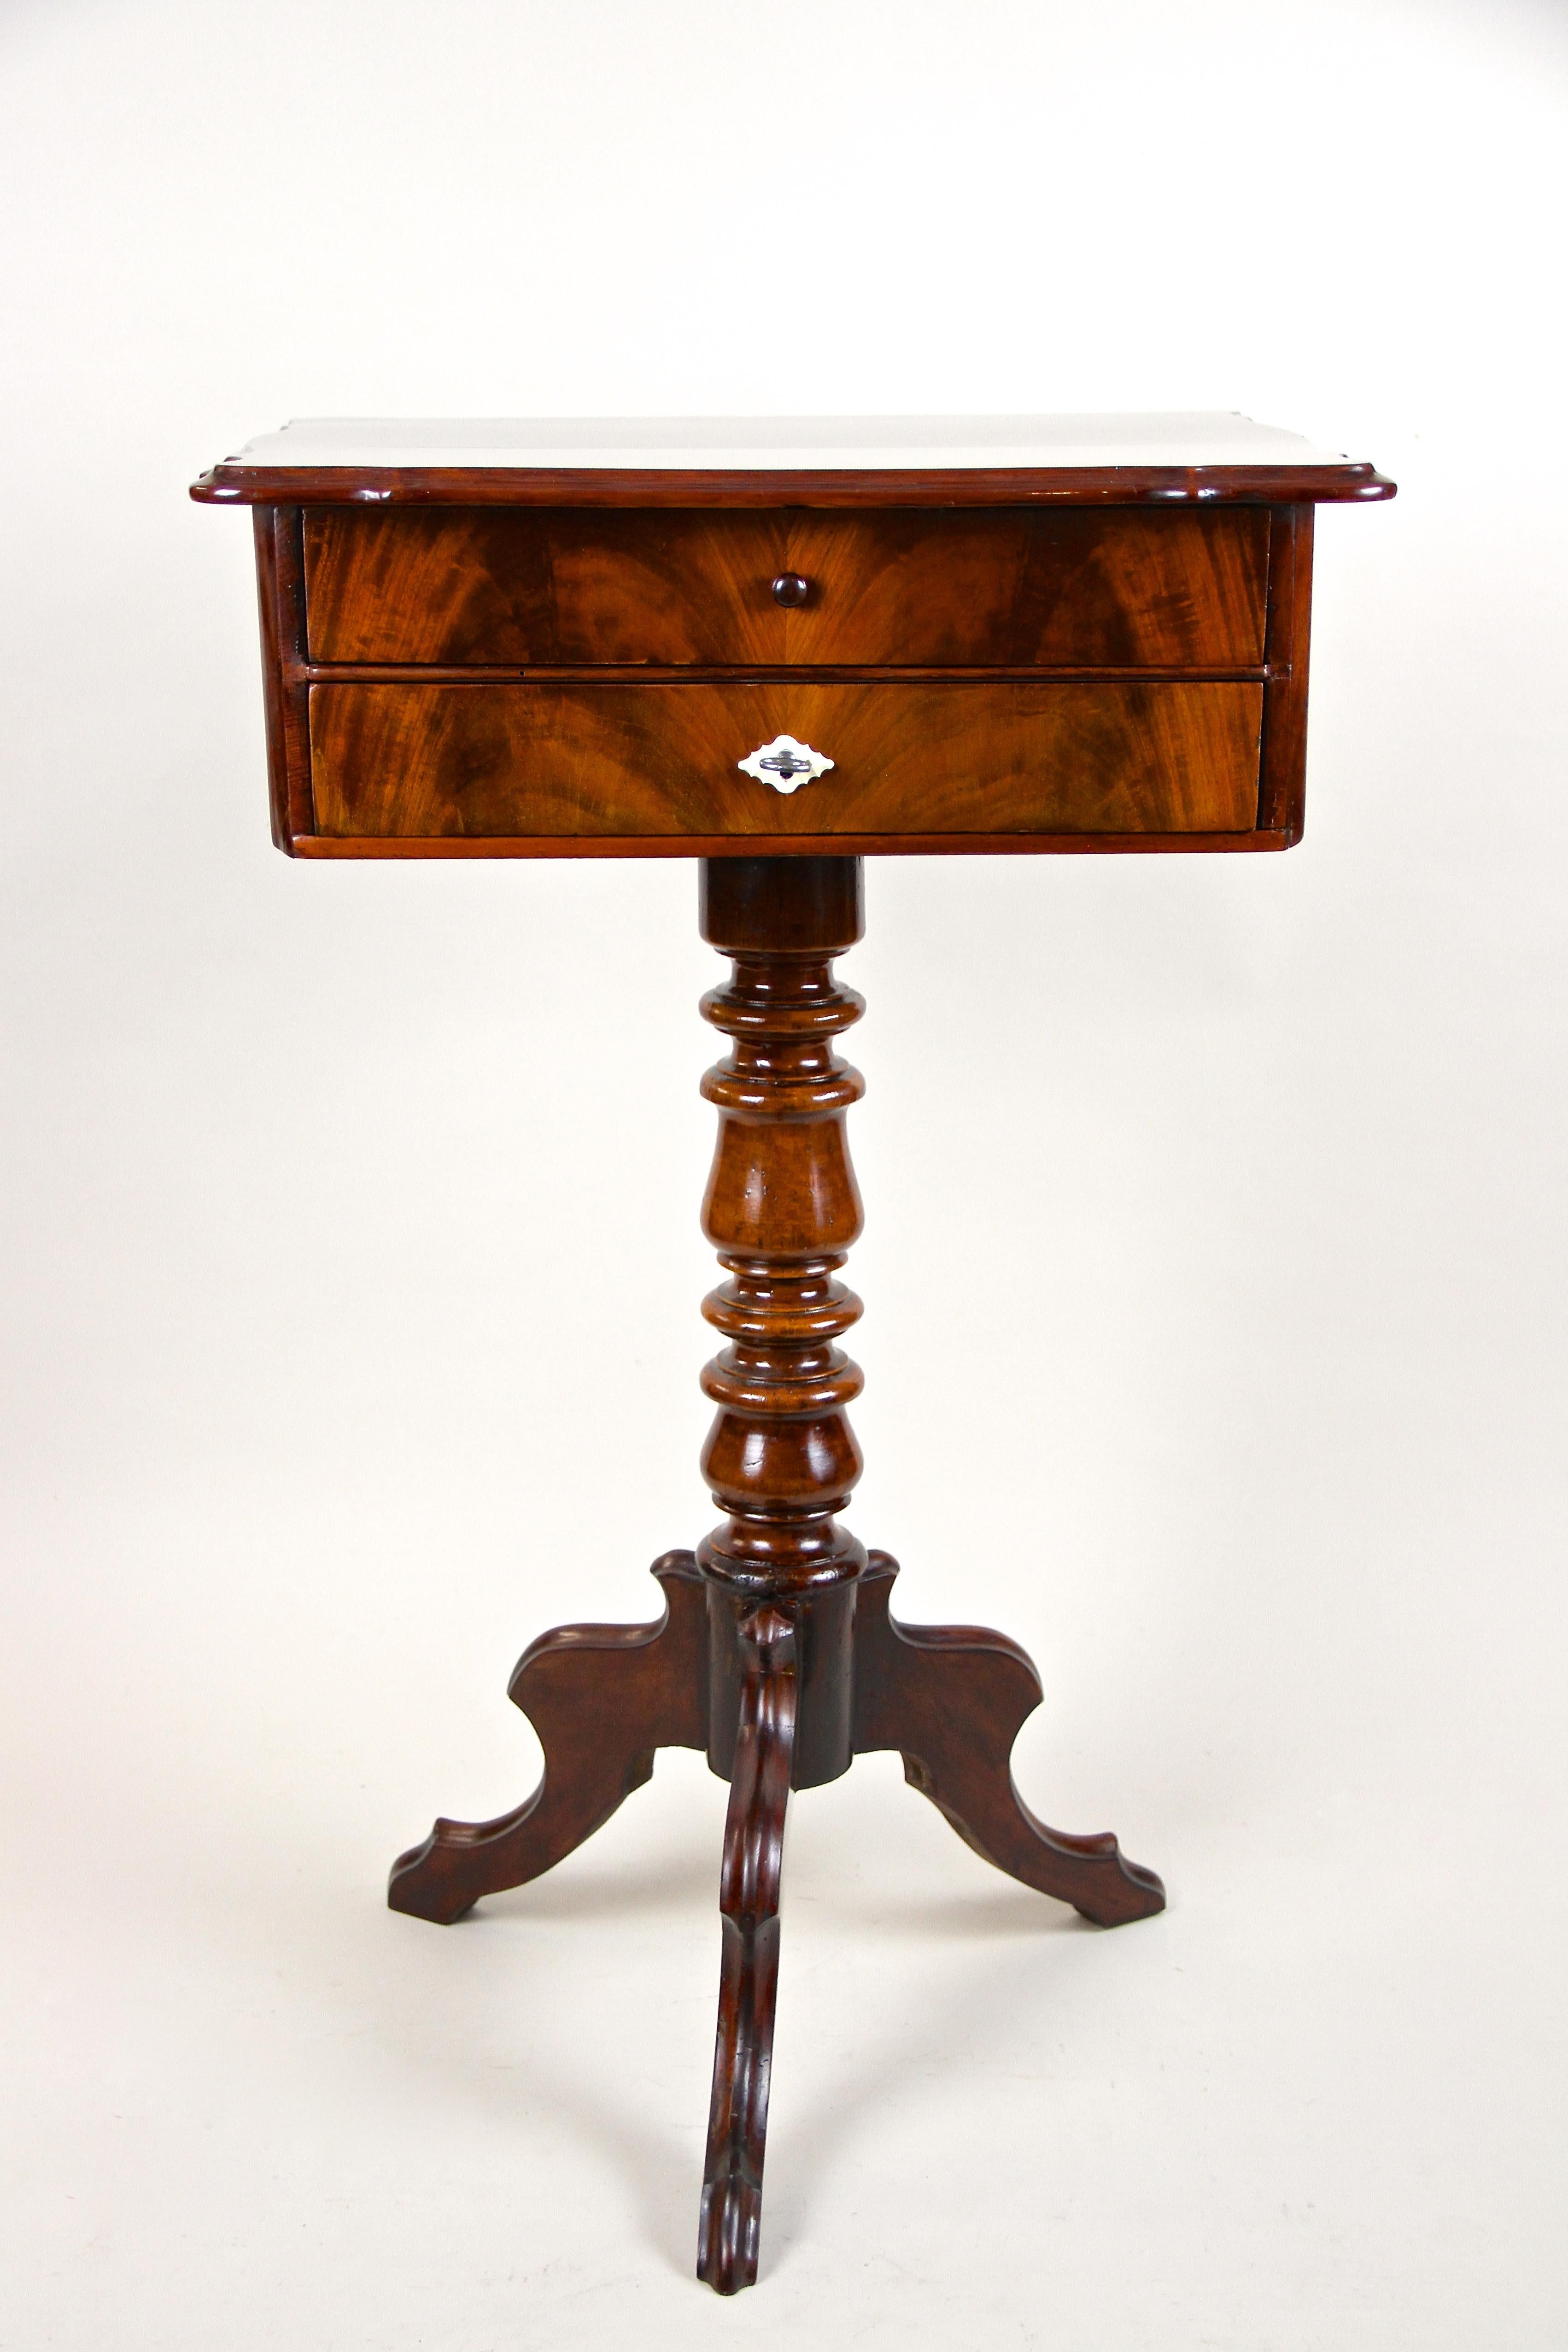 Delicate Louis Philippe side table or sewing table out of France from the late 19th century around 1870. Standing on a beautifully base with three artfully processed legs, this small side table impresses with an amazing veneer work in fine pyramid